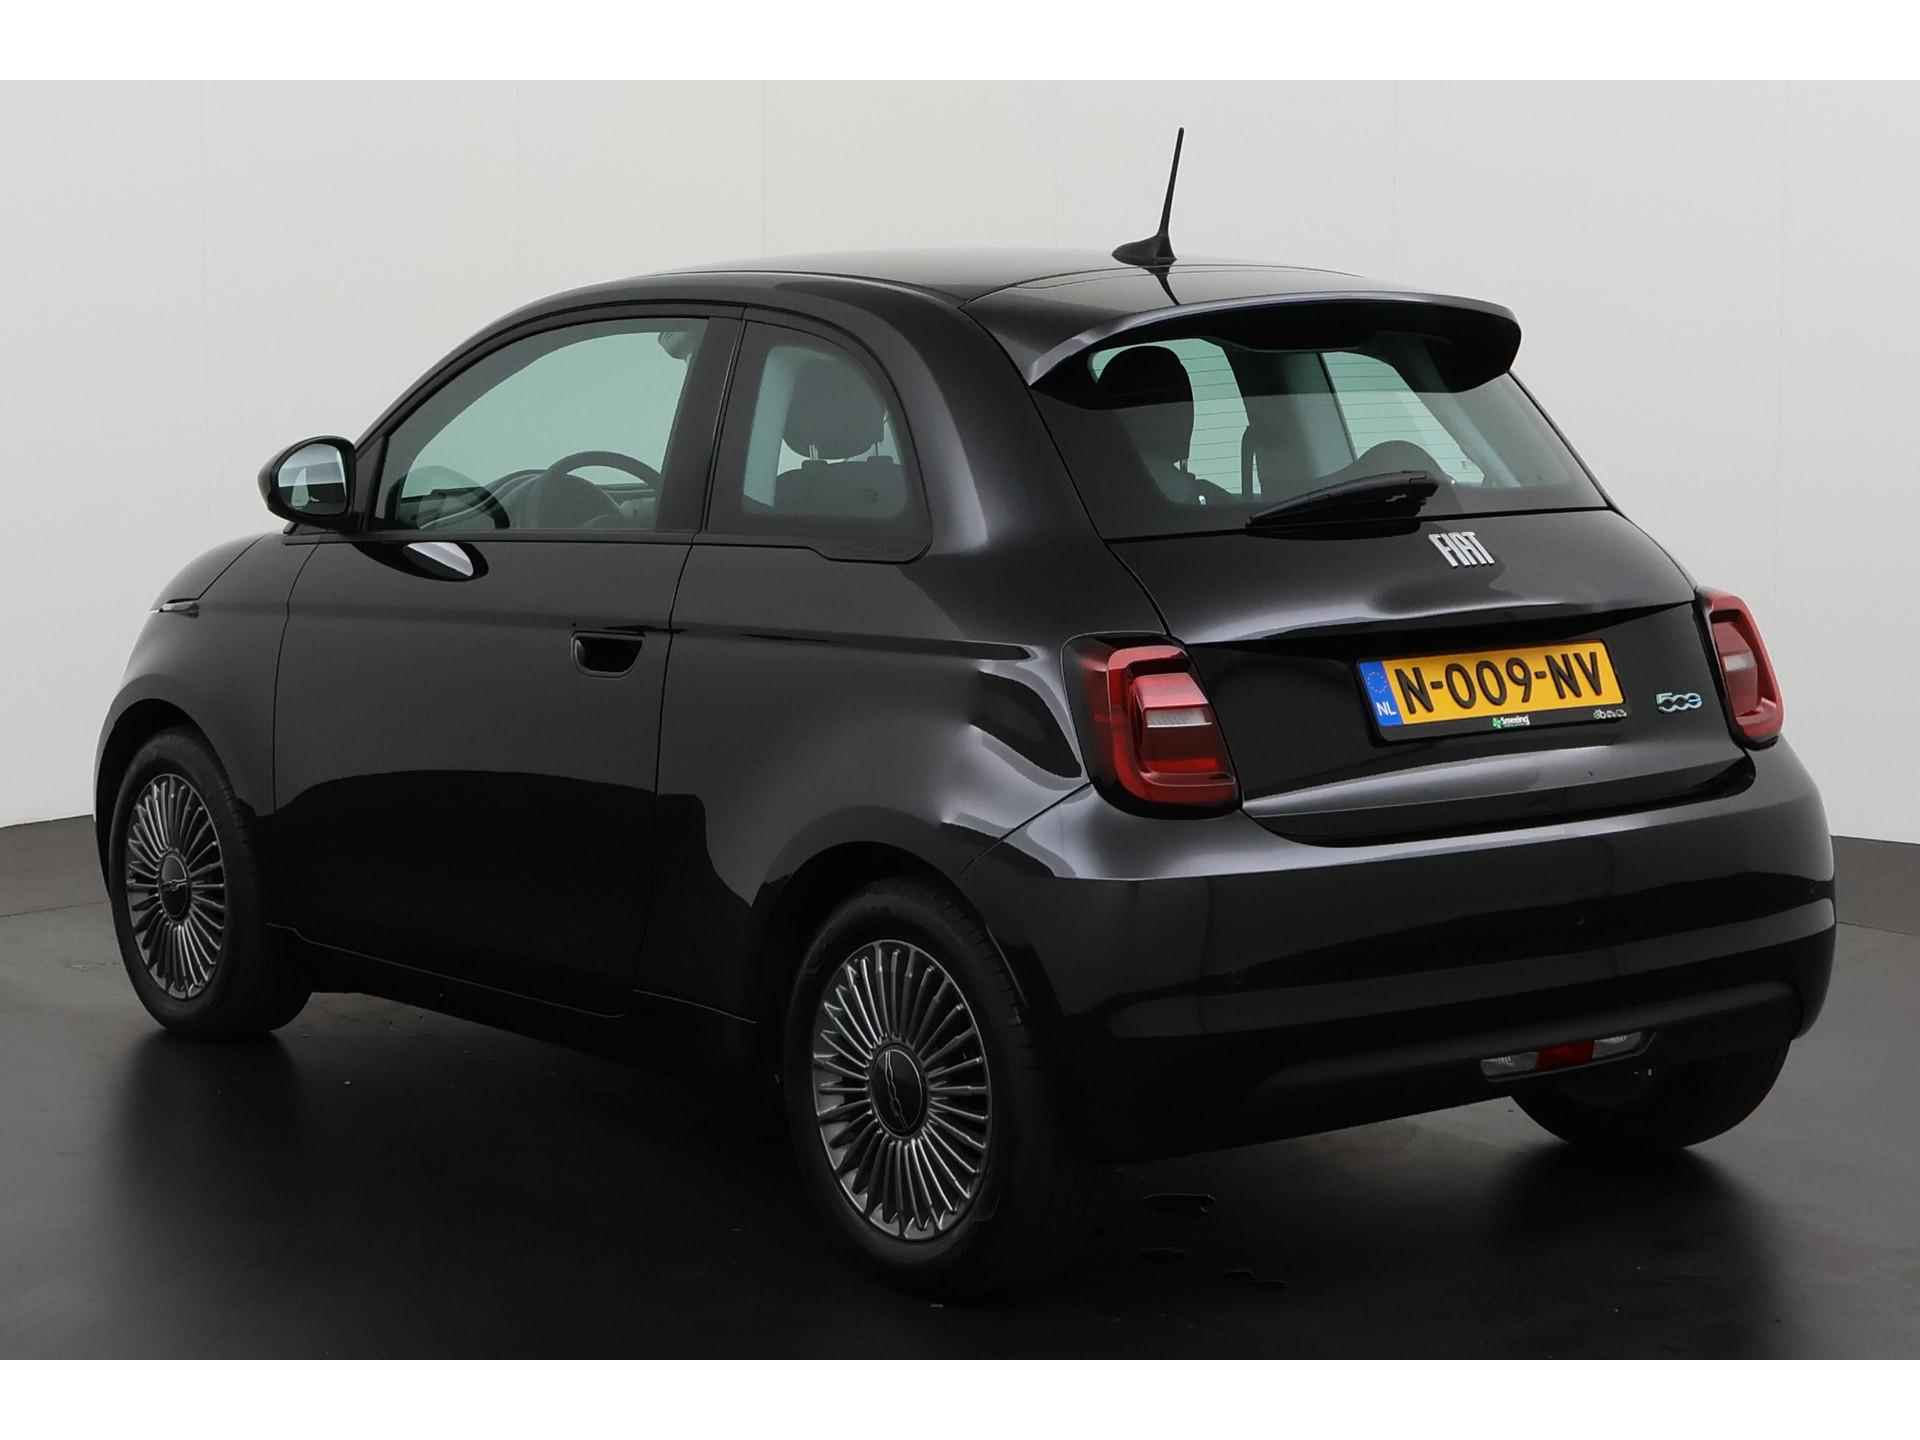 Fiat 500 RED 24 kWh 3-fase | 16.945,- na subsidie | Apple/Android Carplay | Digital Cockpit | Stoelverwarming | Zondag Open! - 6/43